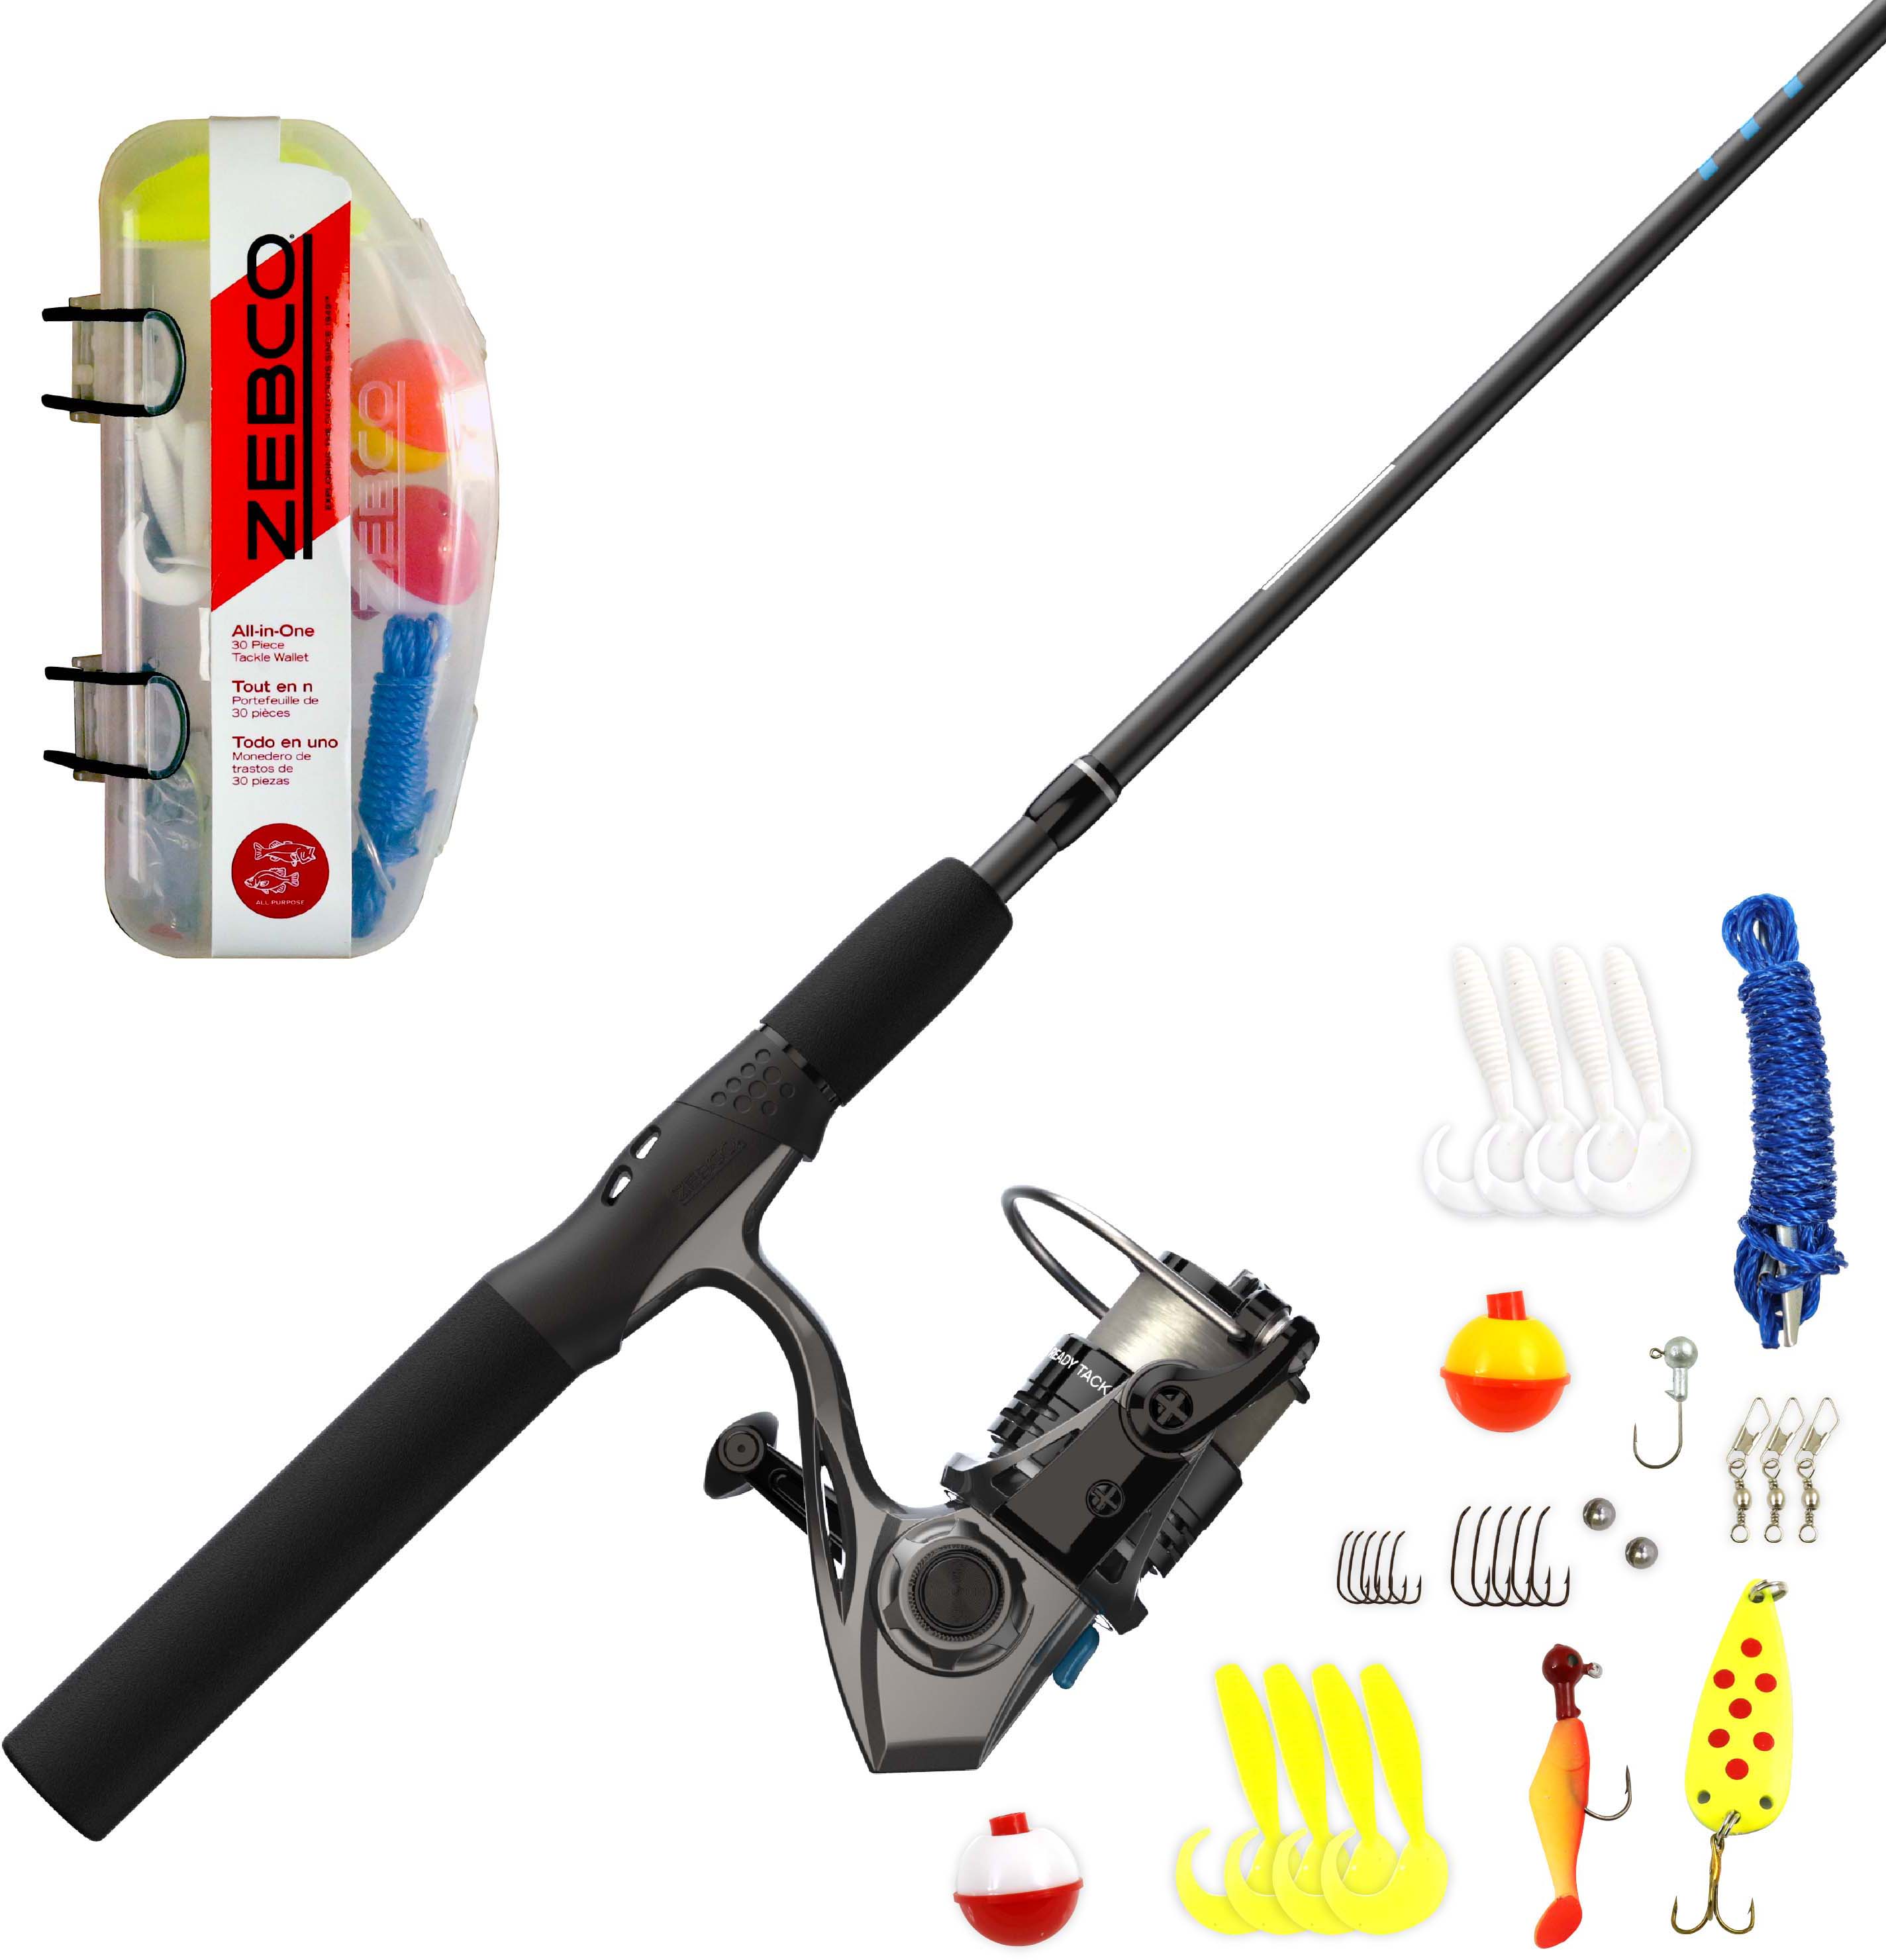 Zebco Crappie Fighter Spinning Reel